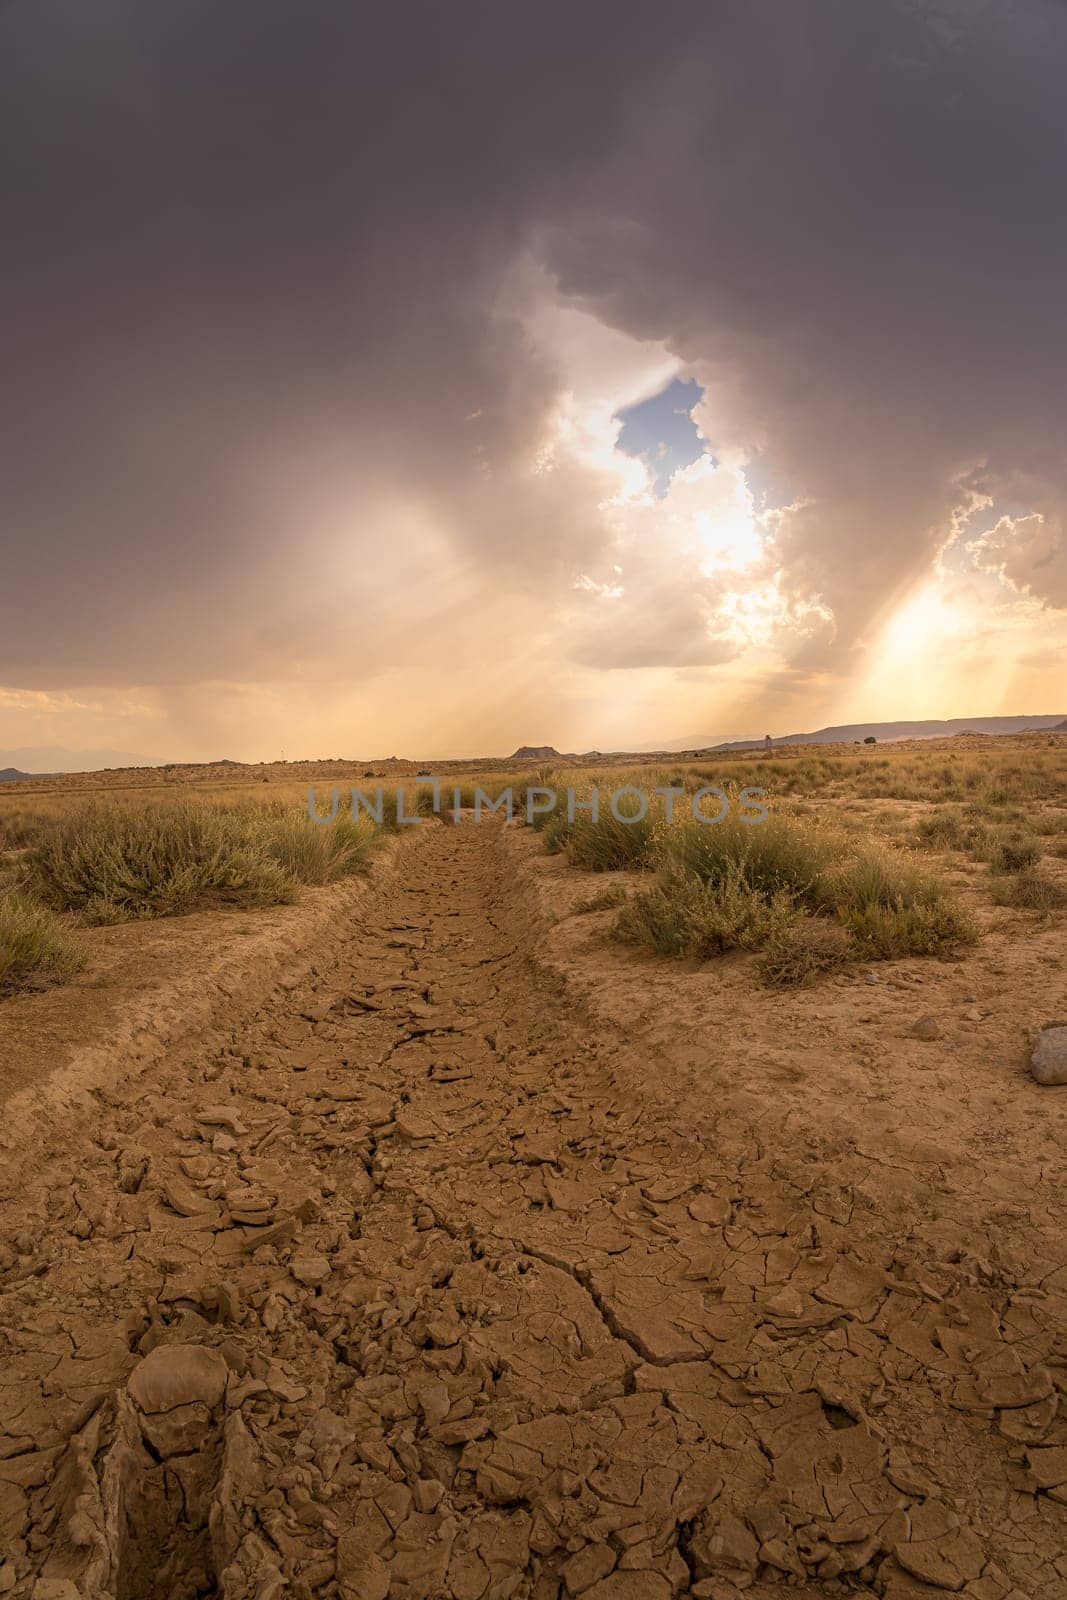 View of Bardenas Reales with stormy sky and dry and cracked ground in Spain.